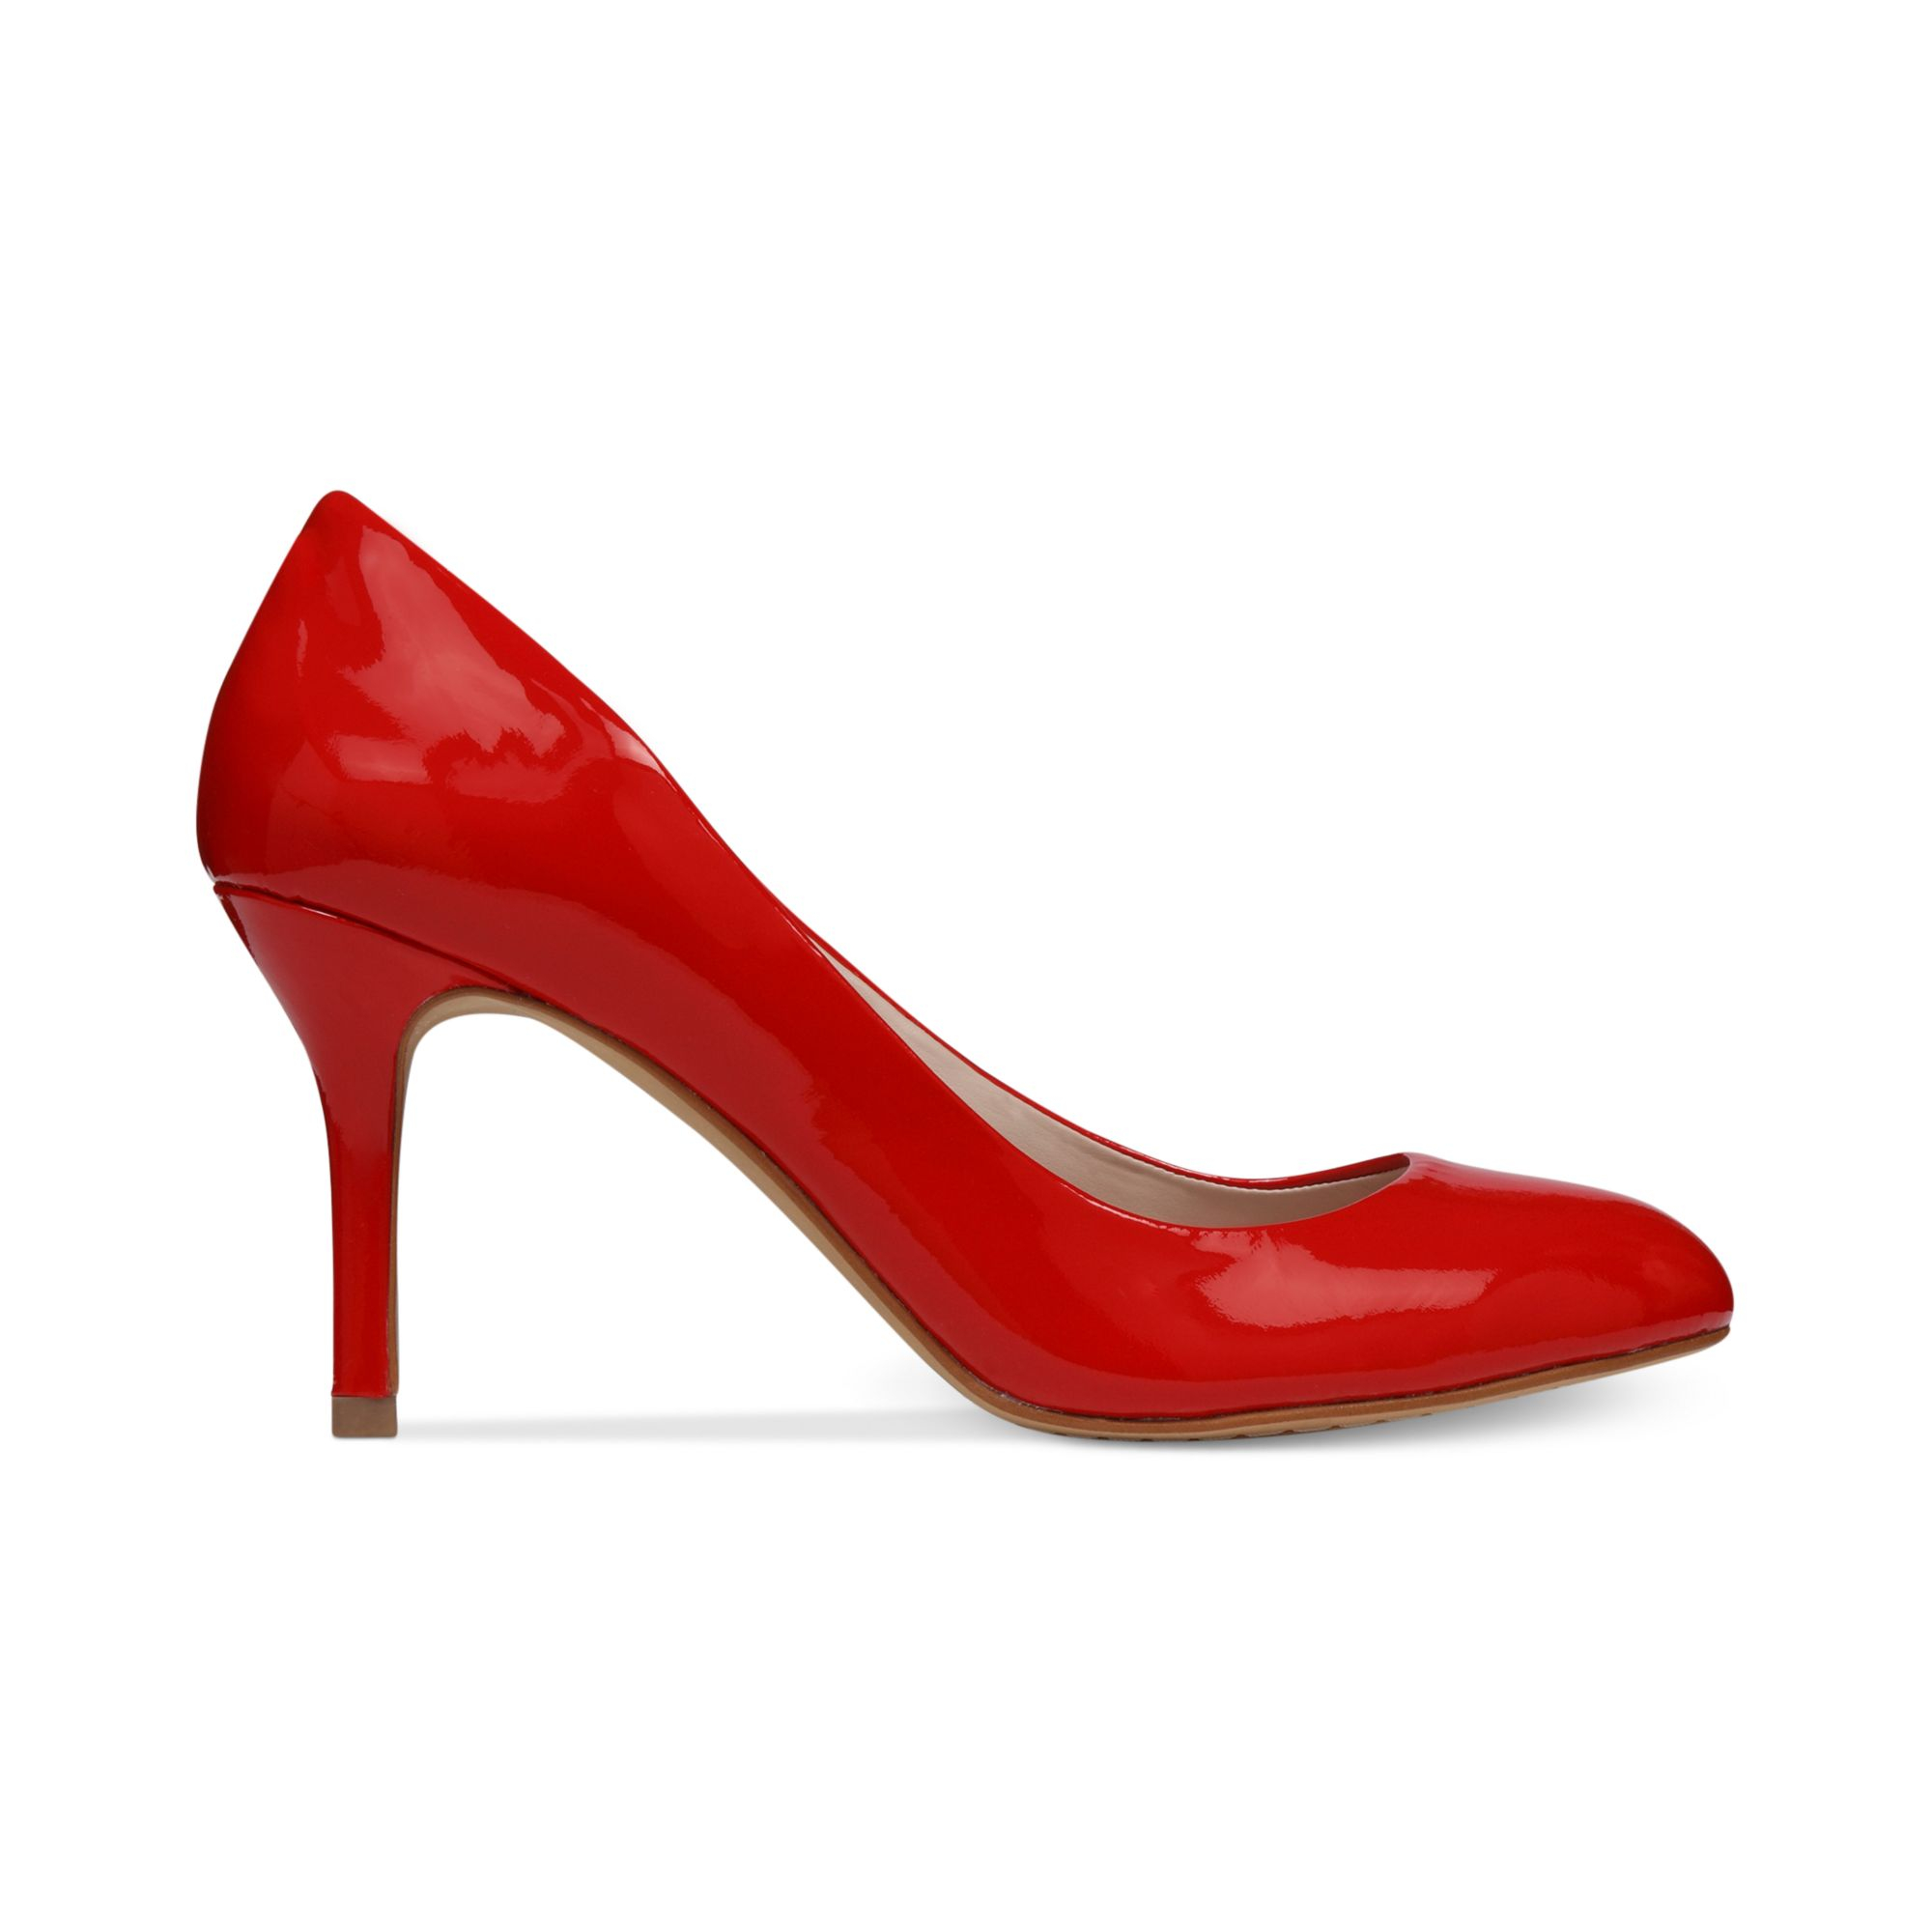 Lyst - Vince Camuto Sariah Pumps in Red